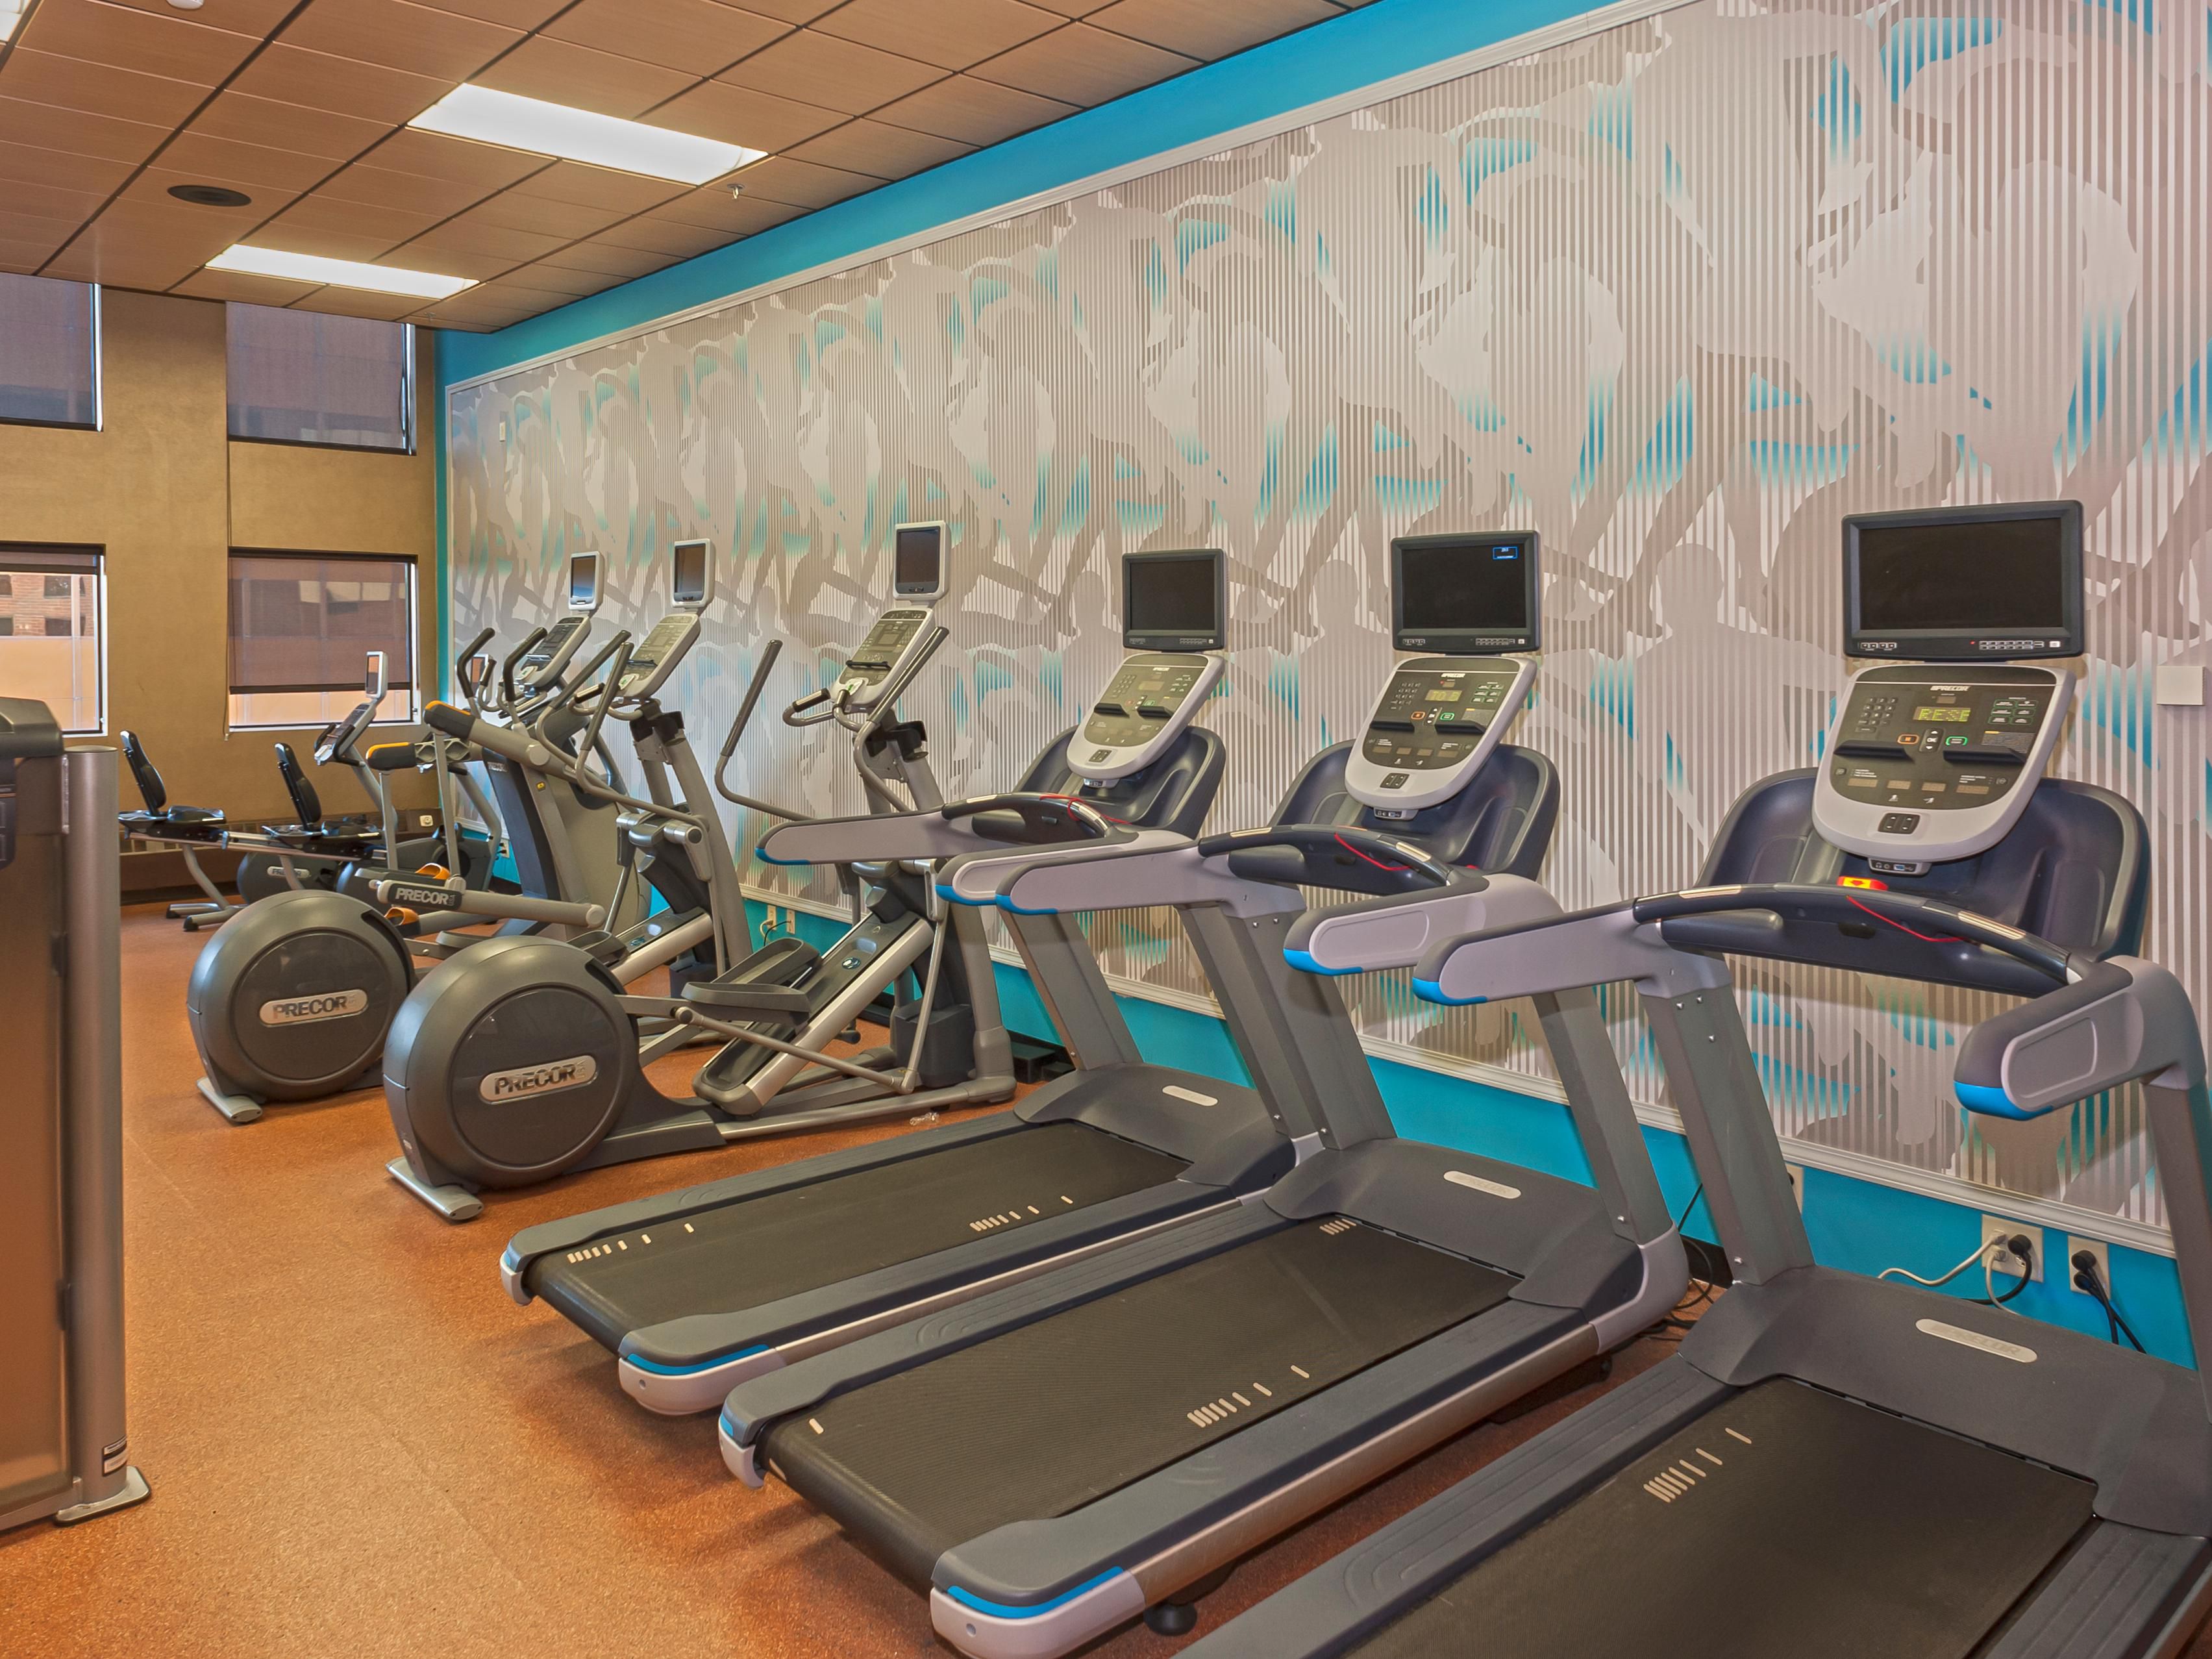 You don’t have to forfeit your fitness routine during your travels. Crowne Plaza AiRE offers 1,200 square feet space, complete with Precor equipment. The fitness center has a wide variety of equipment, such as treadmills, elliptical machines, adaptive motion trainers, stationary bicycles, strength circuit stations, free weights, and yoga mats.